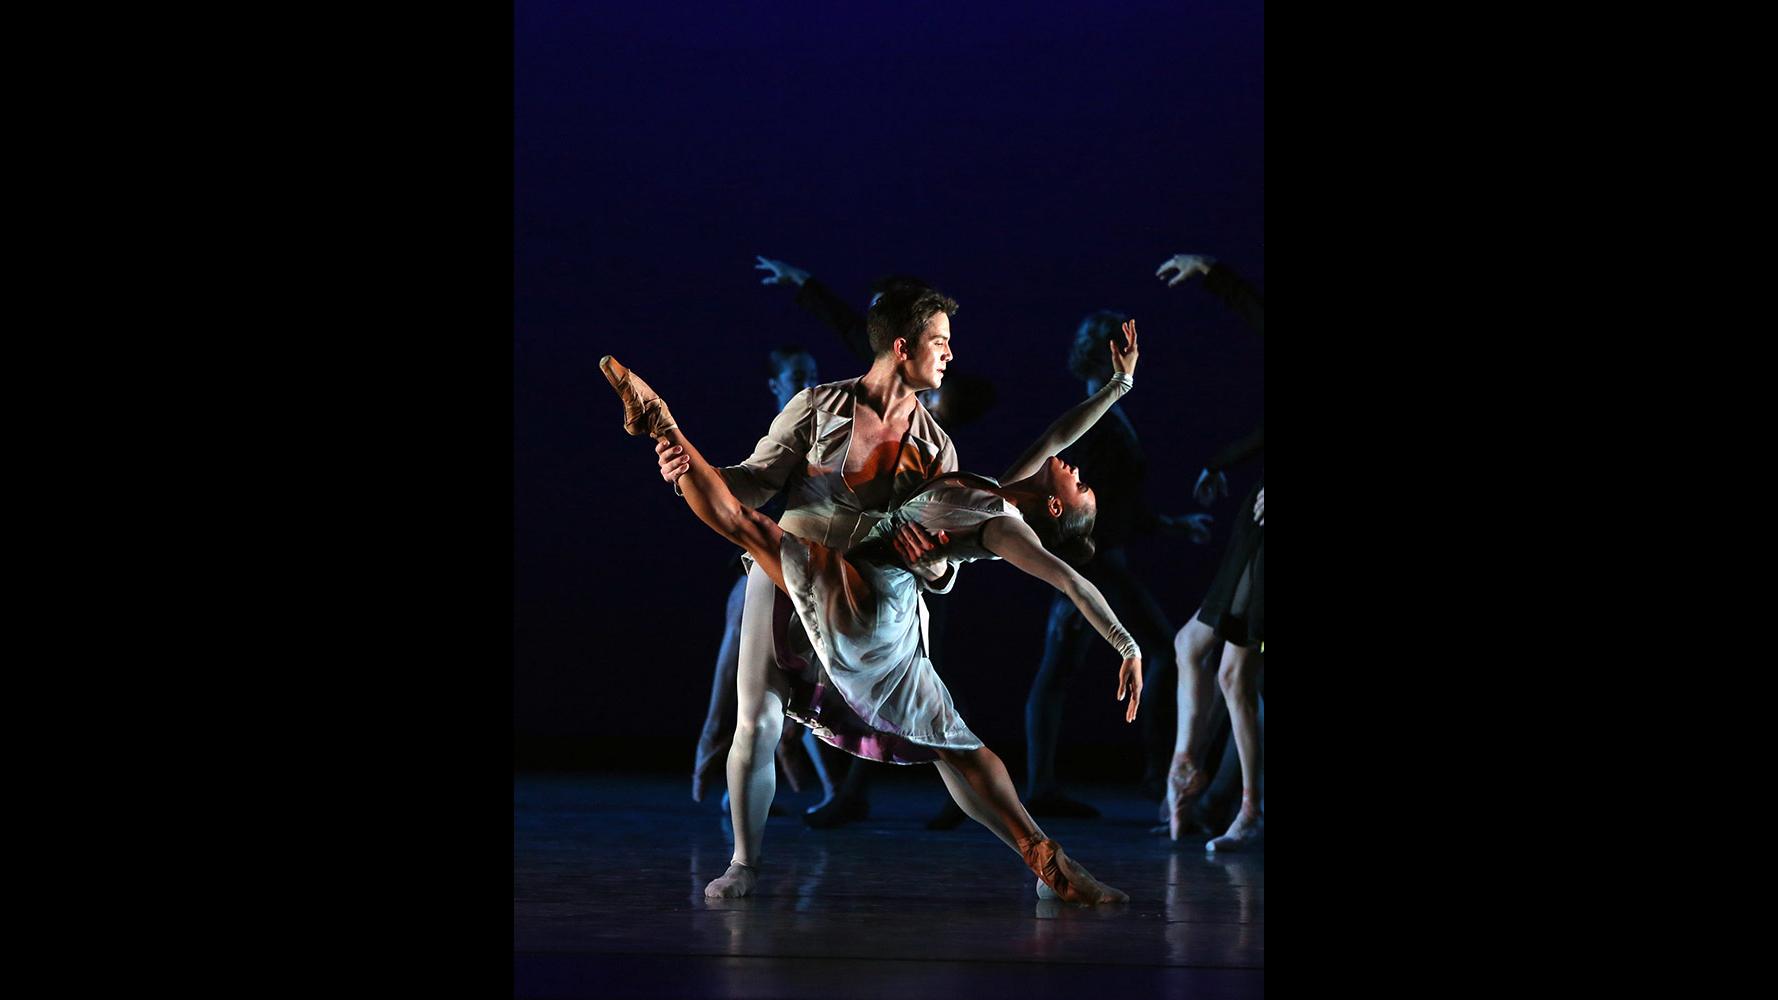 Misty Copeland and Gray Davis in “Thirteen Diversions.” (Credit: Marty Sohl)